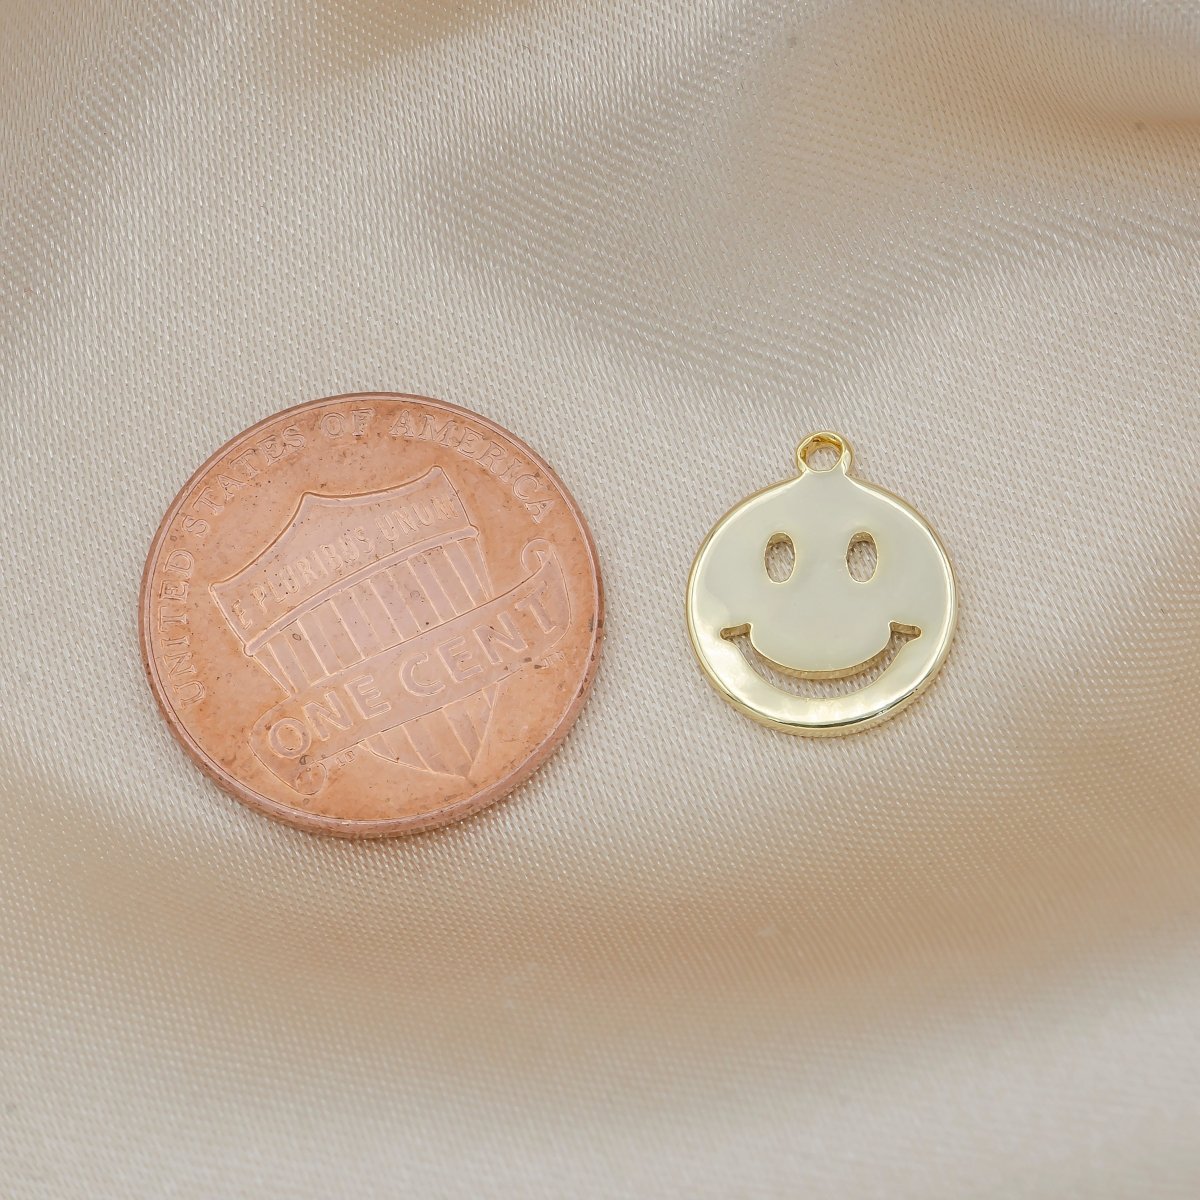 Tiny Golden Smiley Face Charm, Gold Plated Happy Joy Smiling Expression Face Charm Pendant GP-299 - DLUXCA